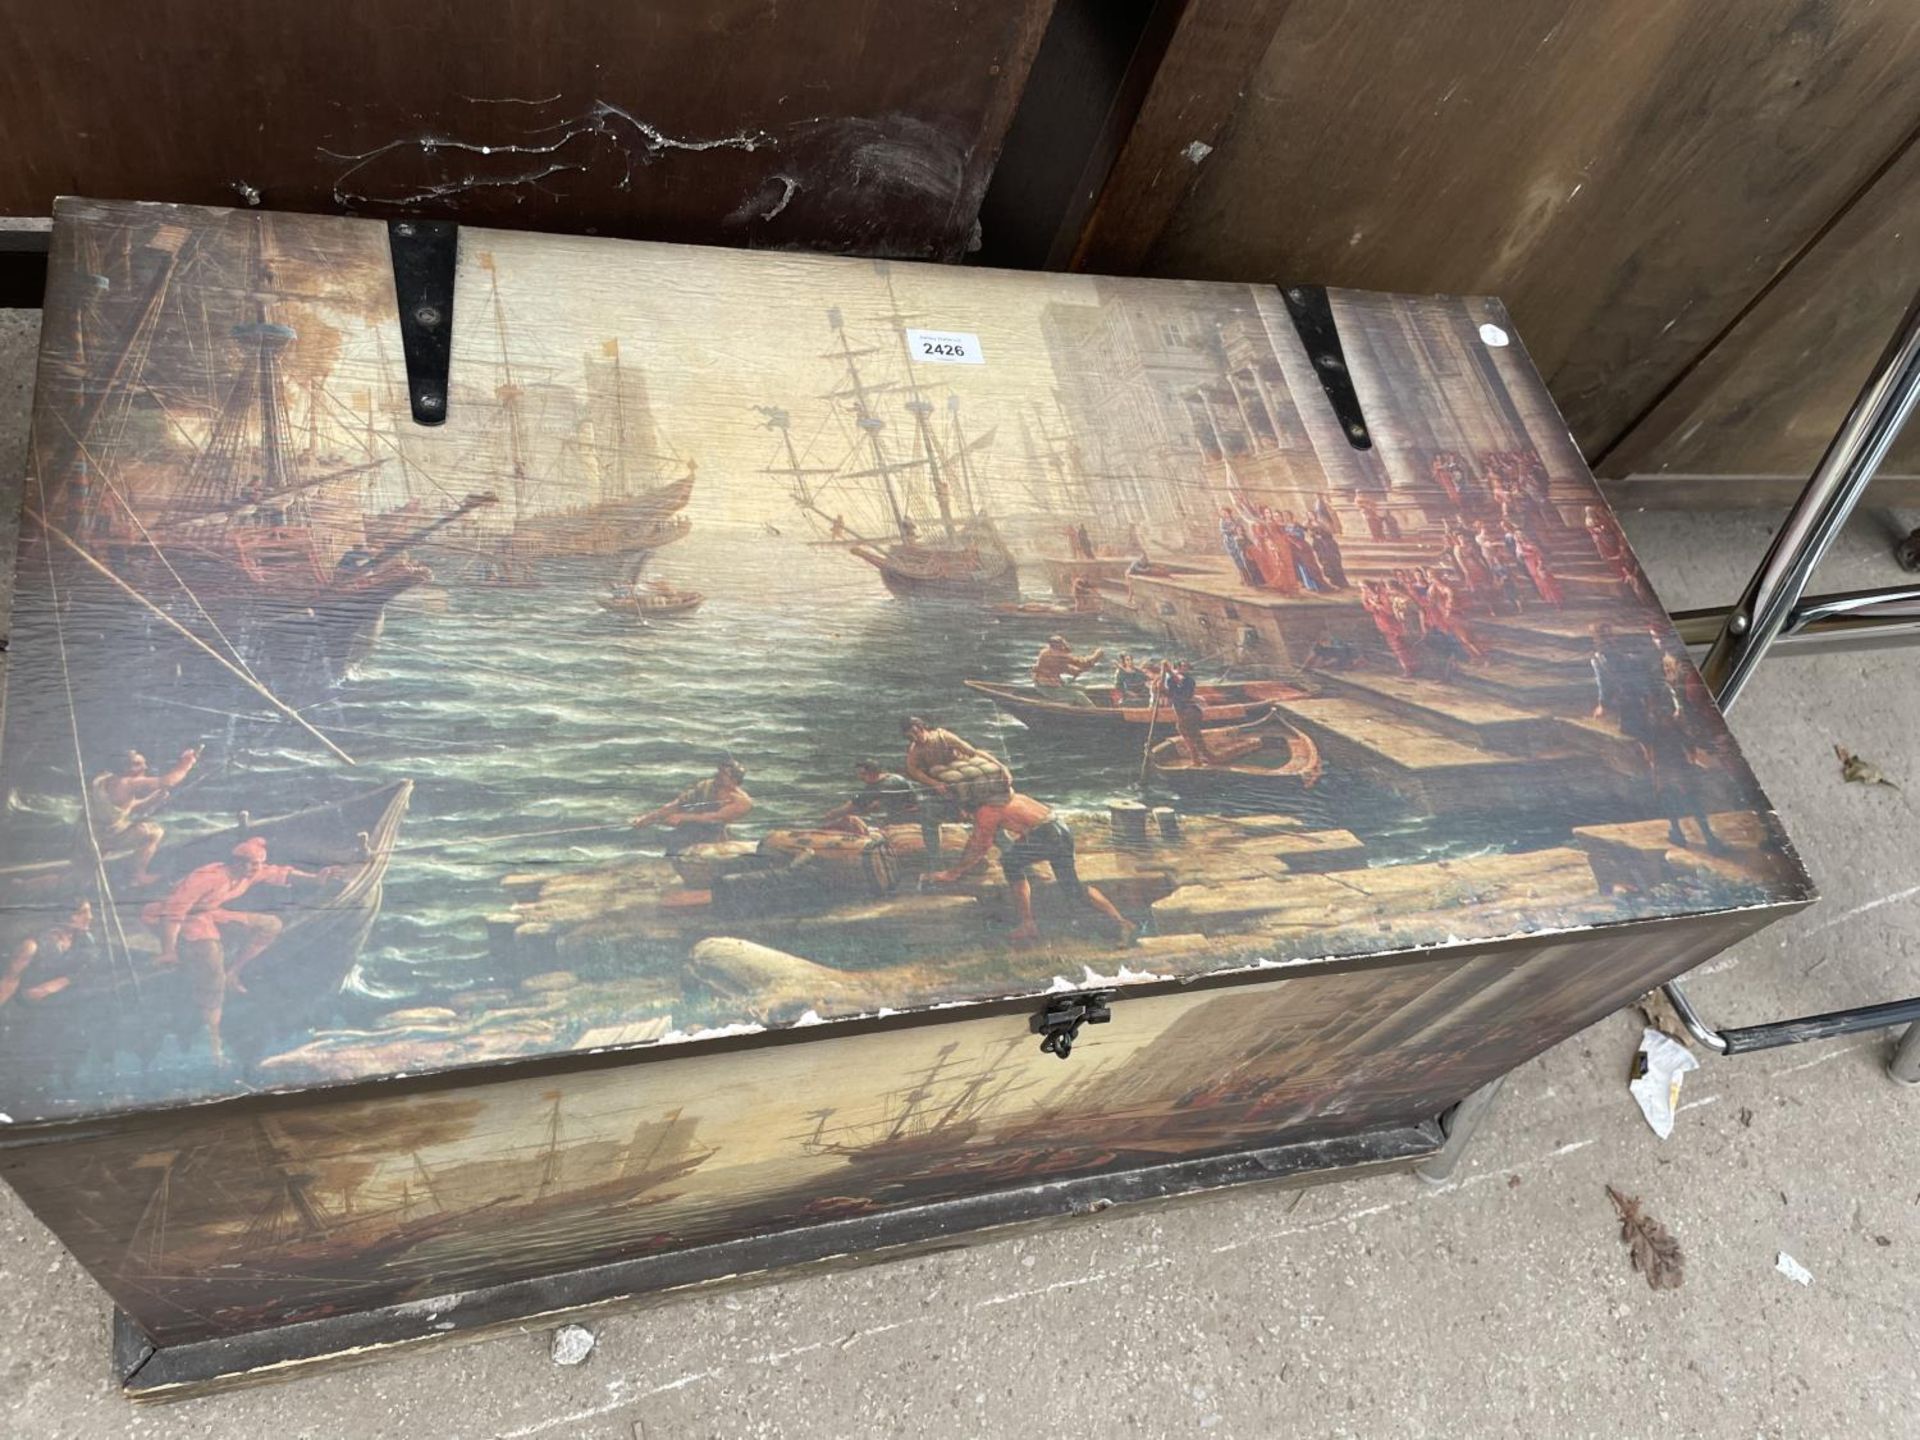 A MODERN TRUNK DEPICTING MASTED SHIPS - Image 2 of 3